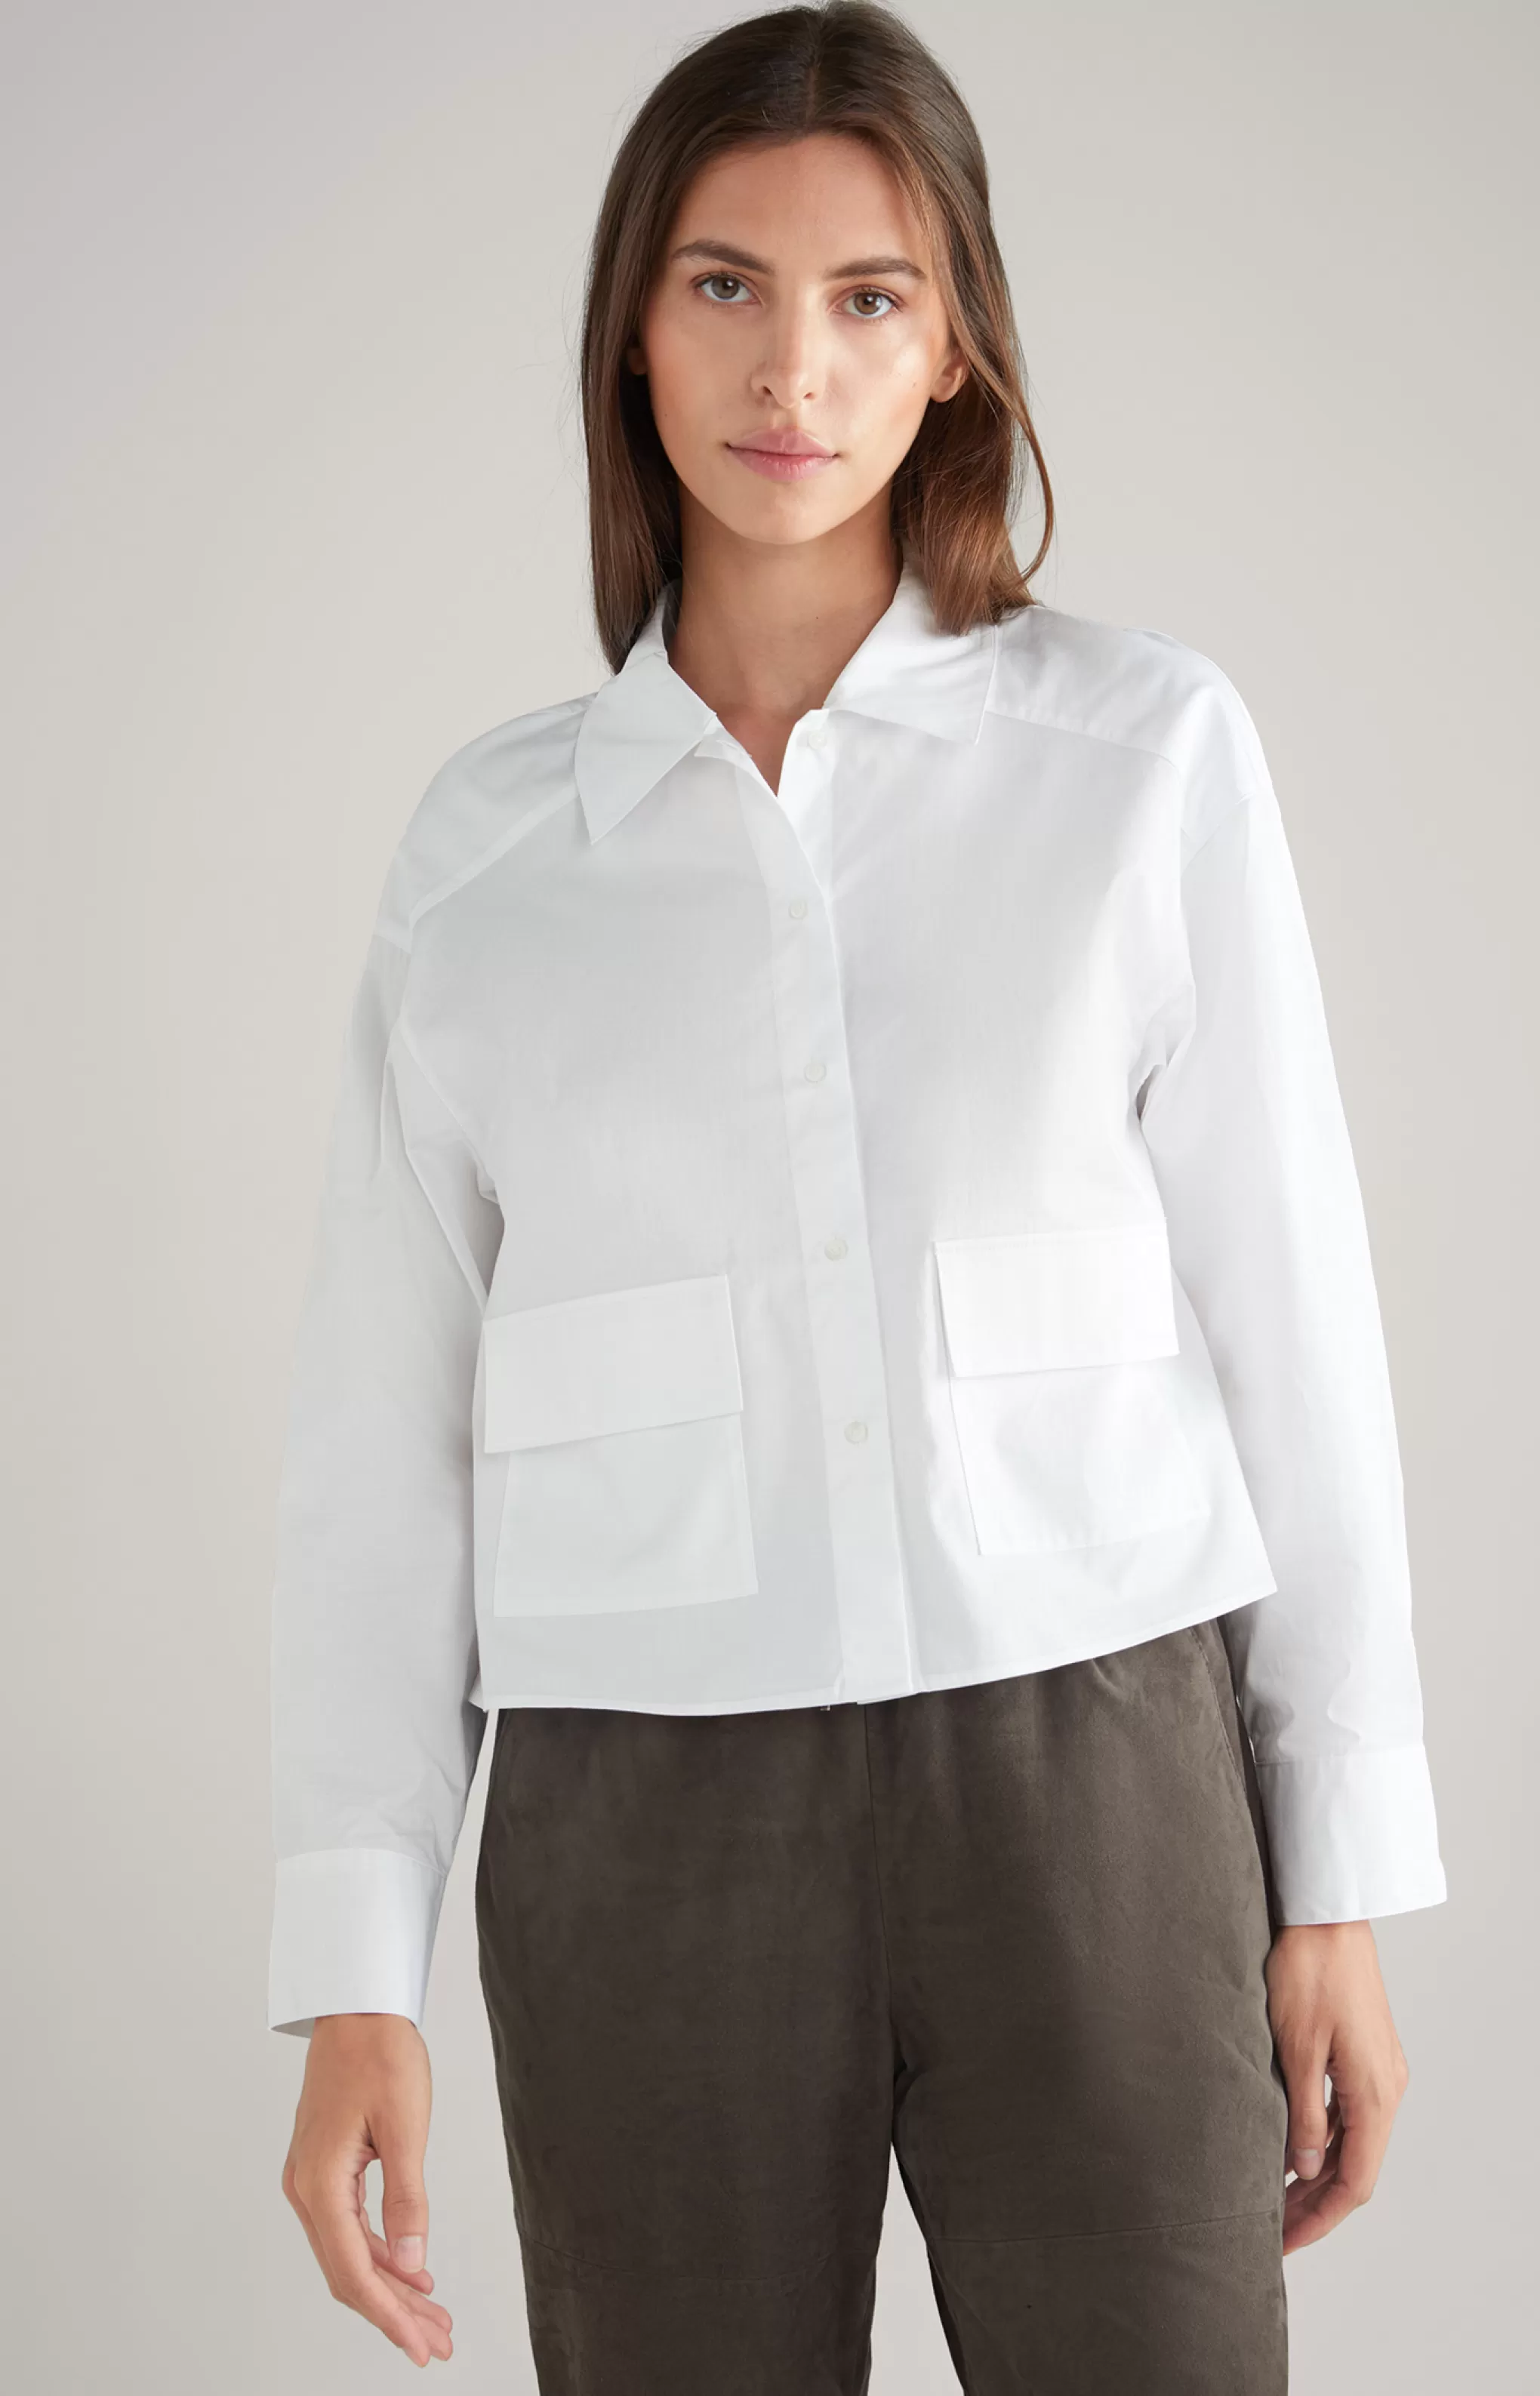 Blouses | Clothing*JOOP Blouses | Clothing Cotton Twill Blouse in